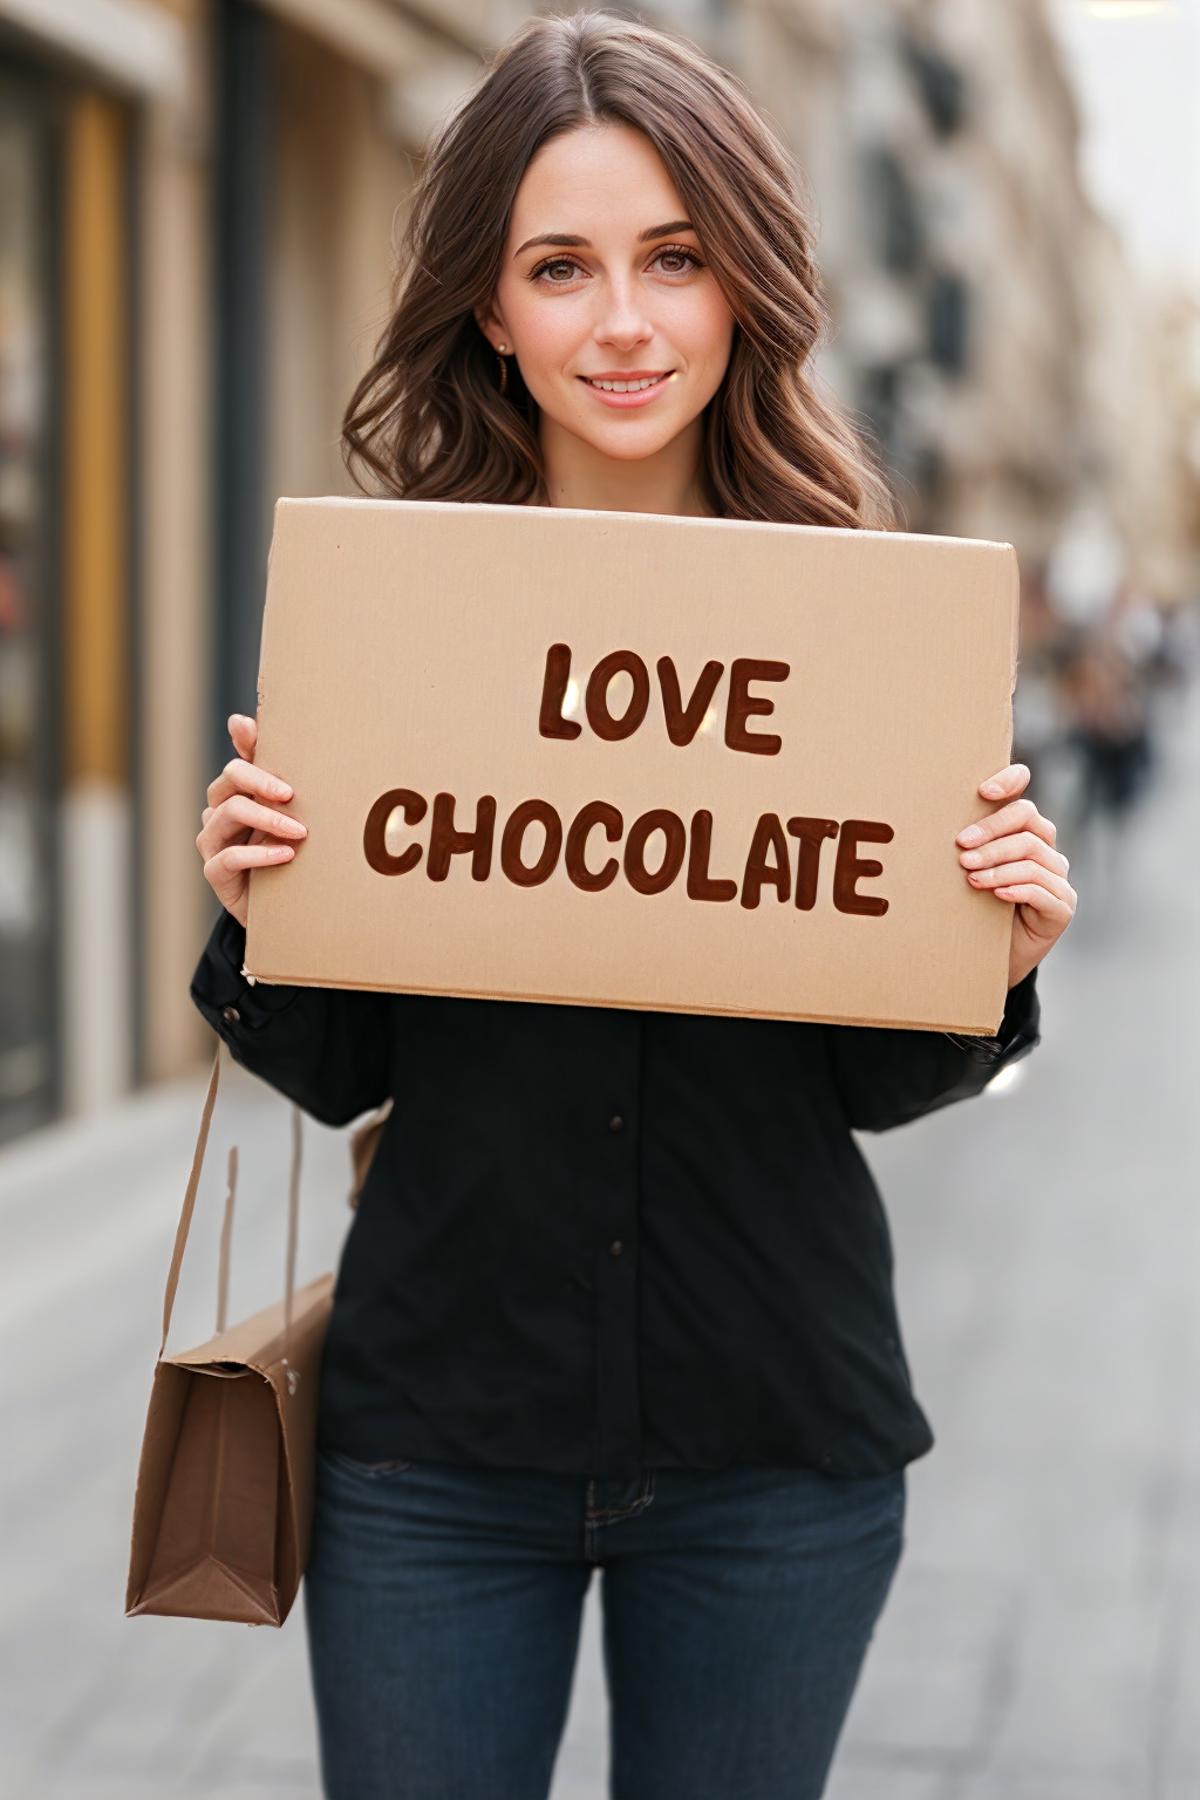 A woman holding a cardboard box with the words "Love Chocolate" written on it.